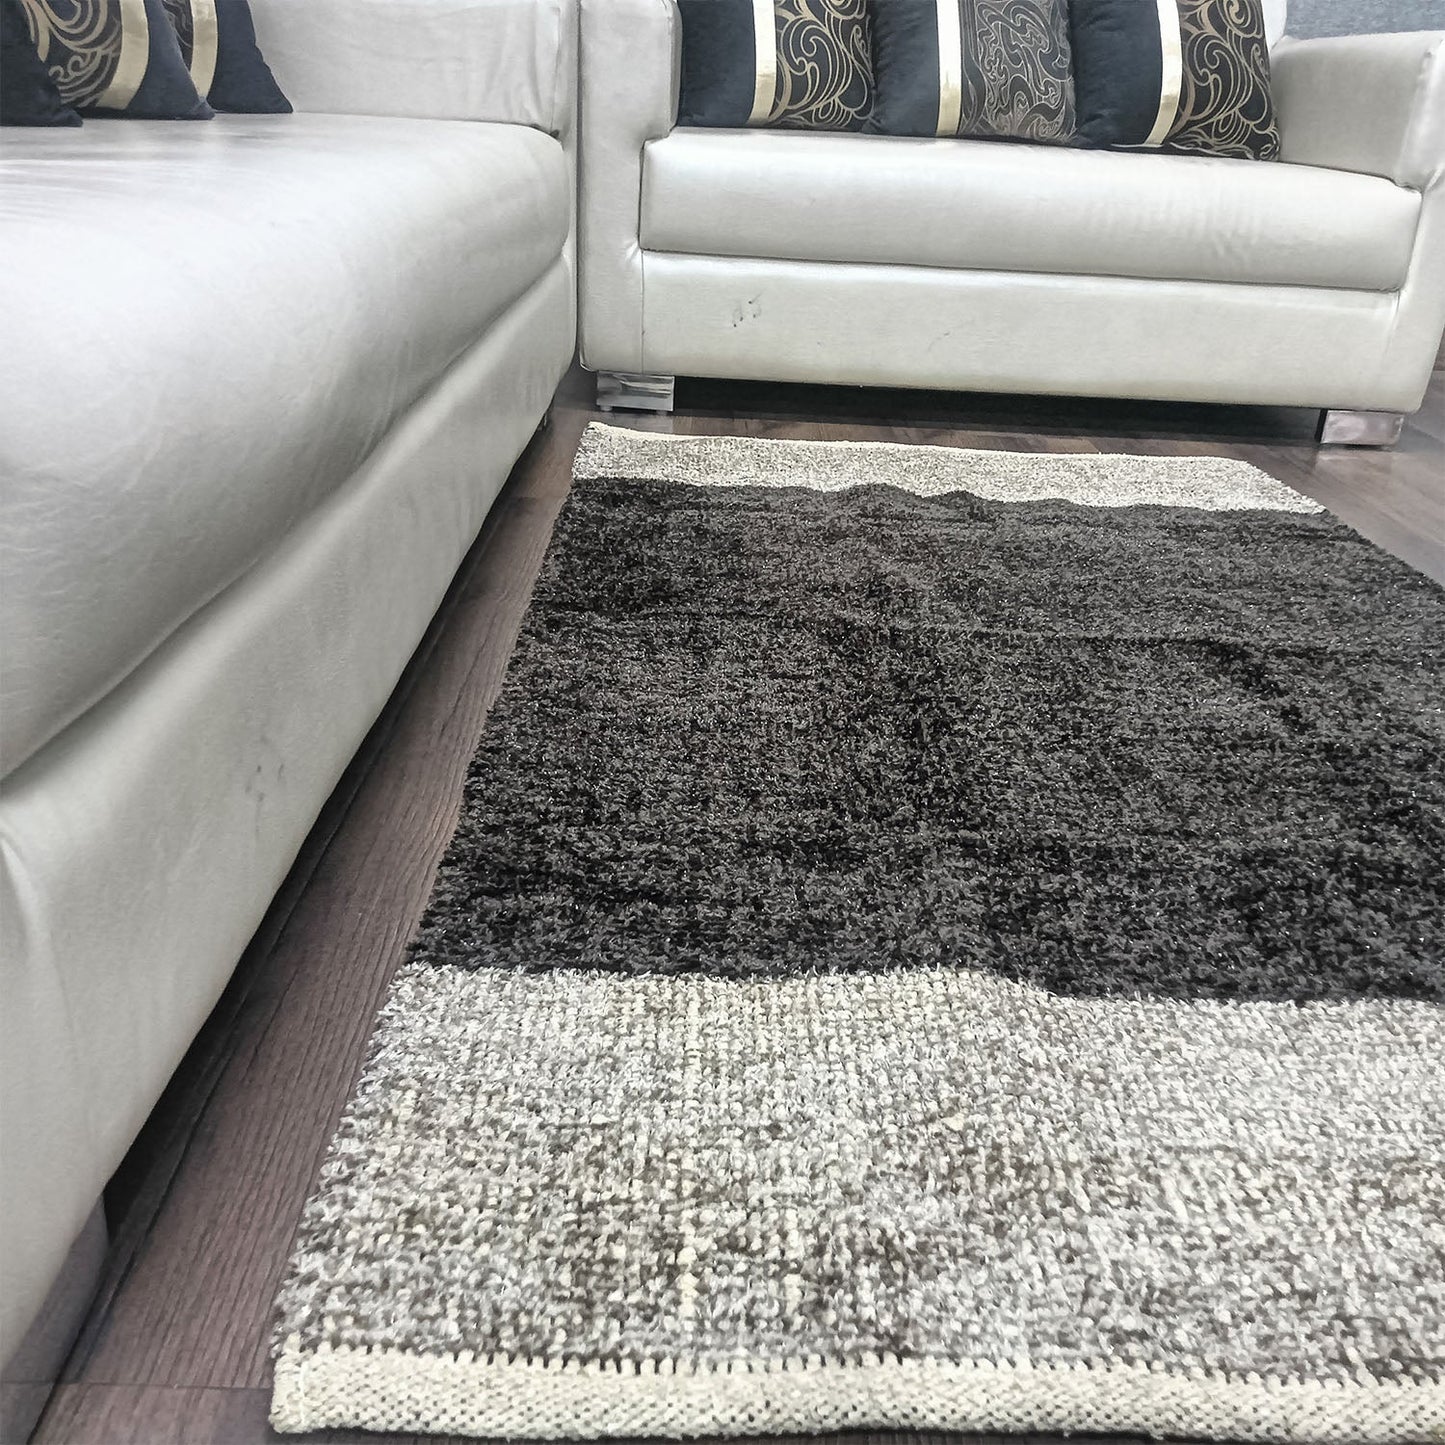 Avioni Handloom Cut Shuttle Rugs by Master Artisans | Soft Touch | Home Washable | Coffee and Beige | Reversible - 3 feet x 5 feet (~90 cm x 150 cm)